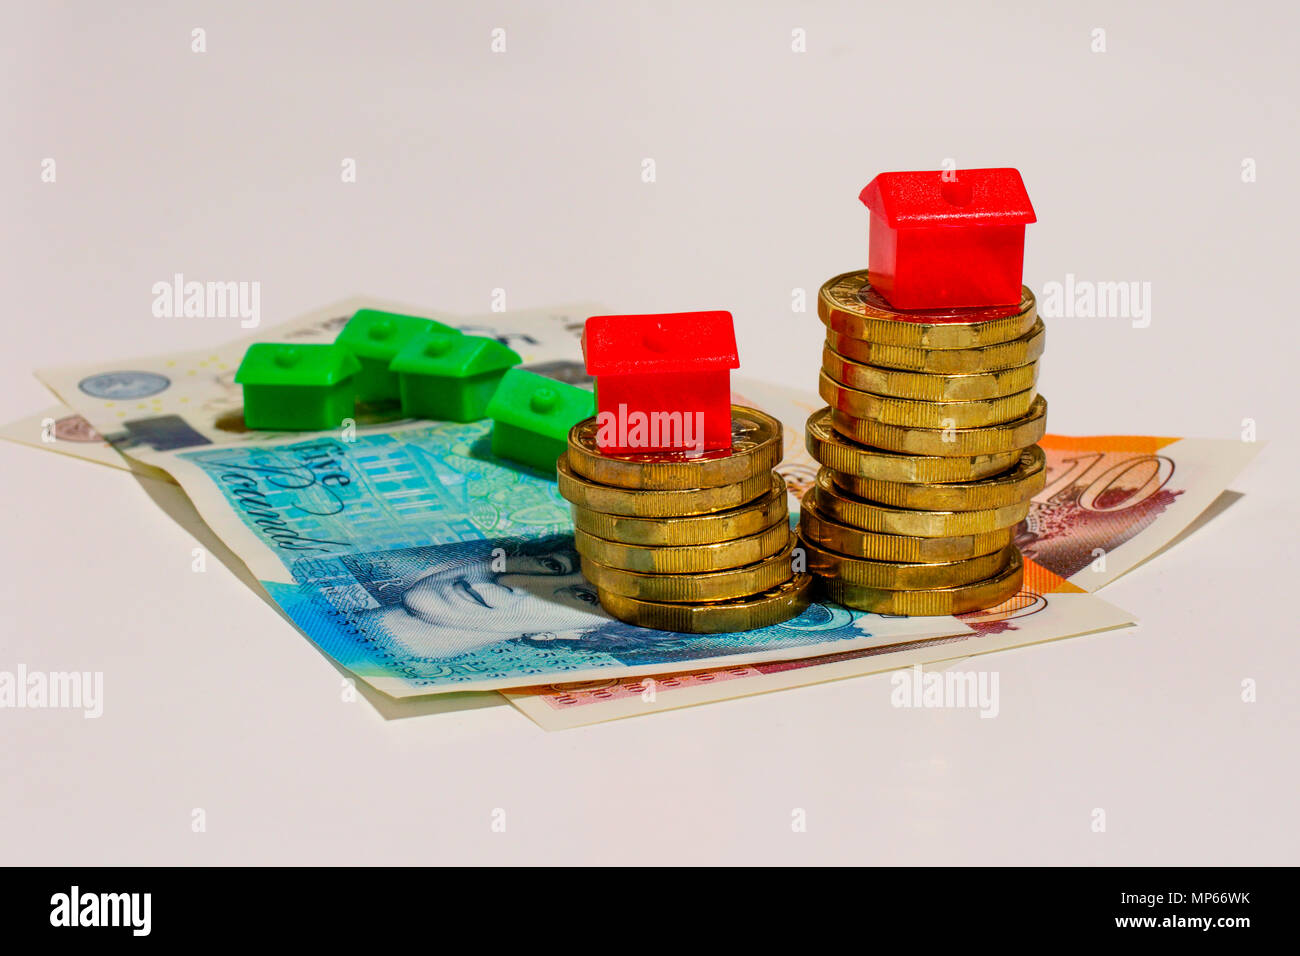 Financial Concept pictures, UK GBP and monopoly houses Stock Photo